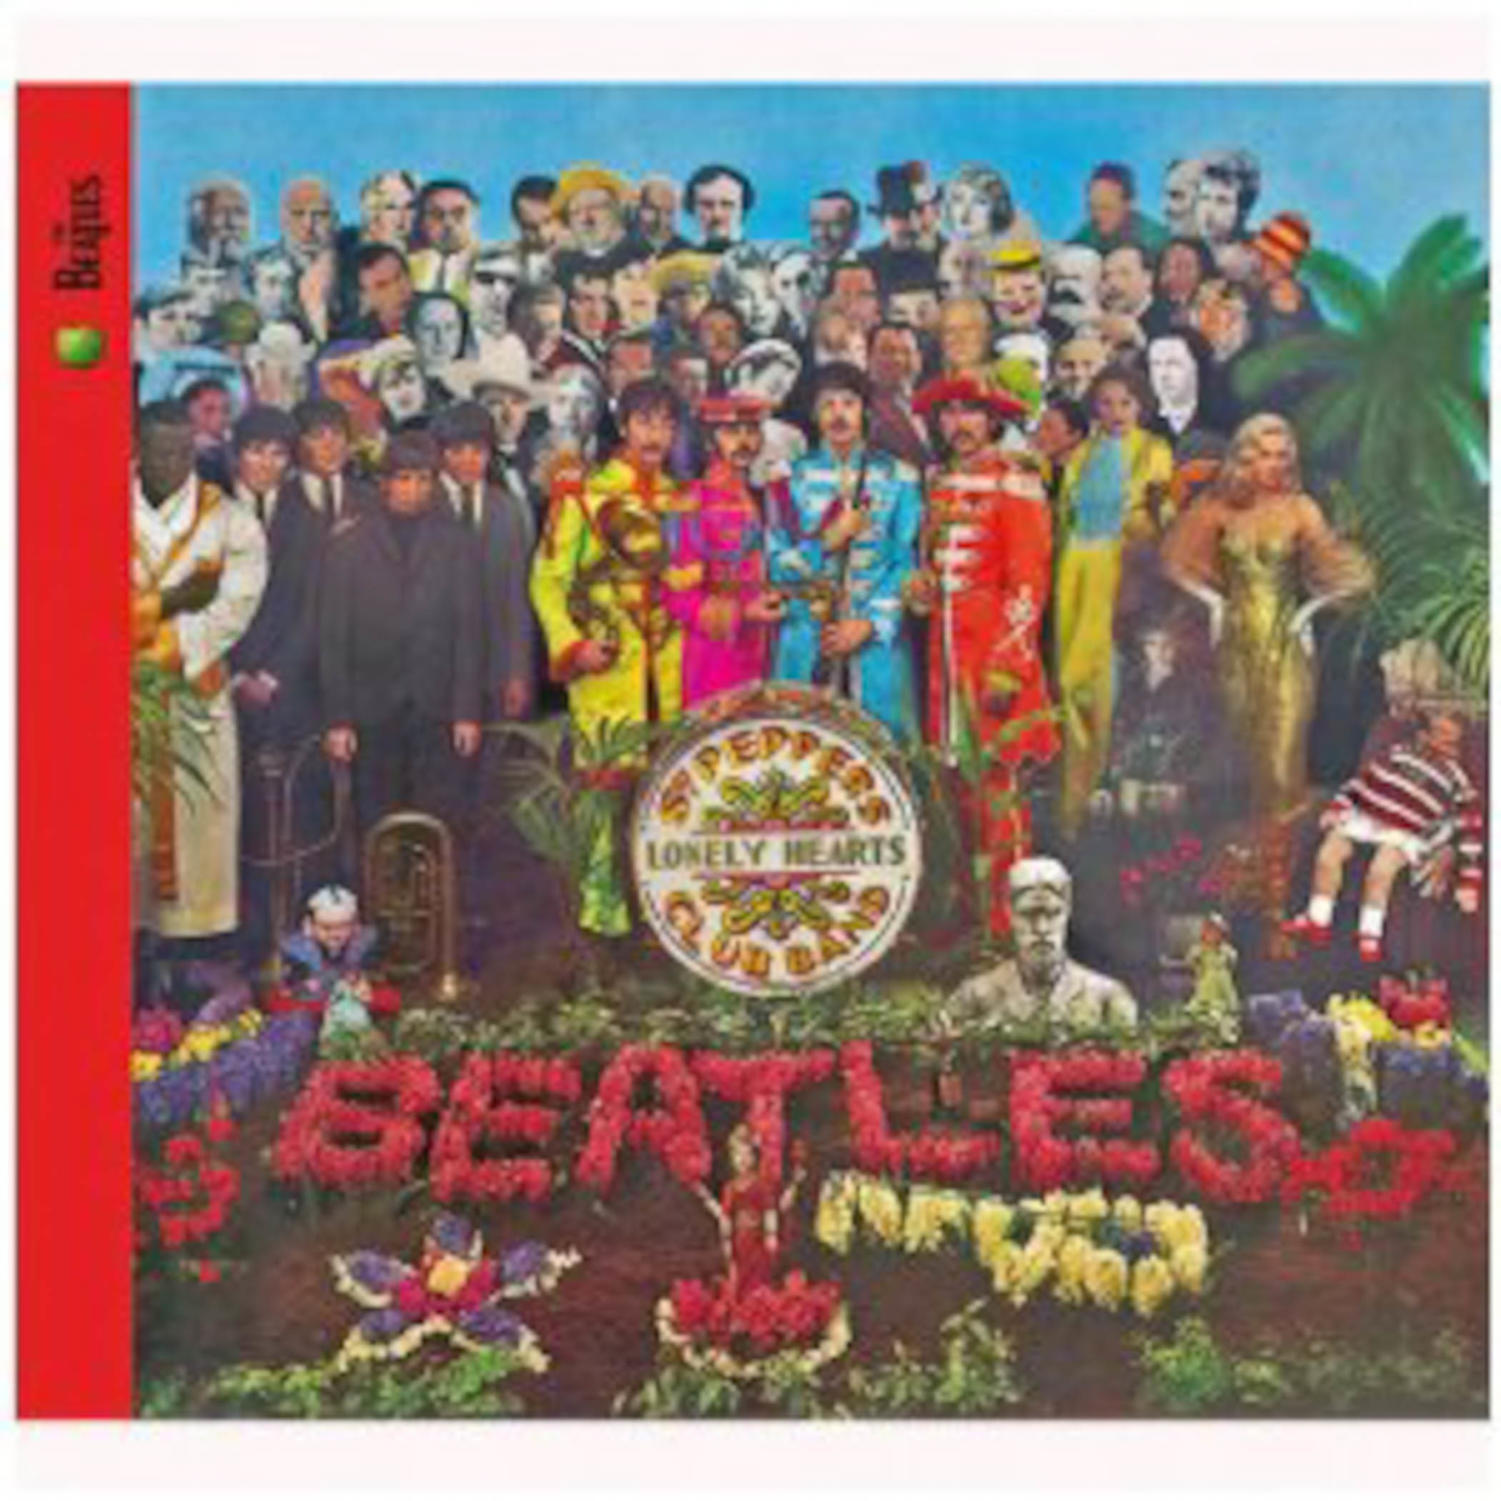 Sgt. Pepper's Lonely Hearts Club Band was the eigth album released by The Beatles.